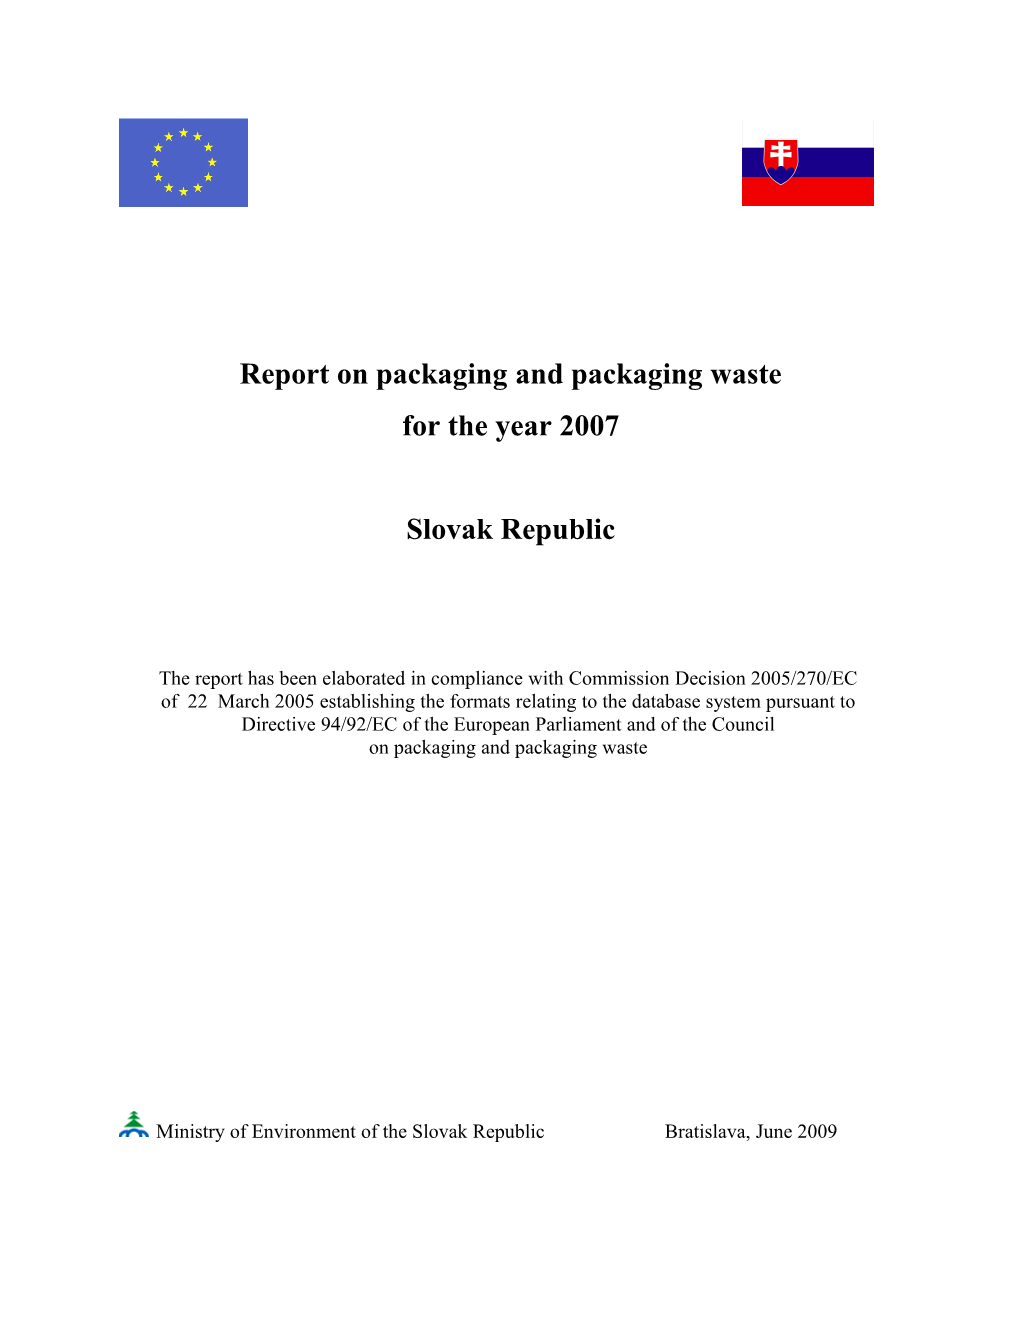 Report on Packaging and Packaging Waste